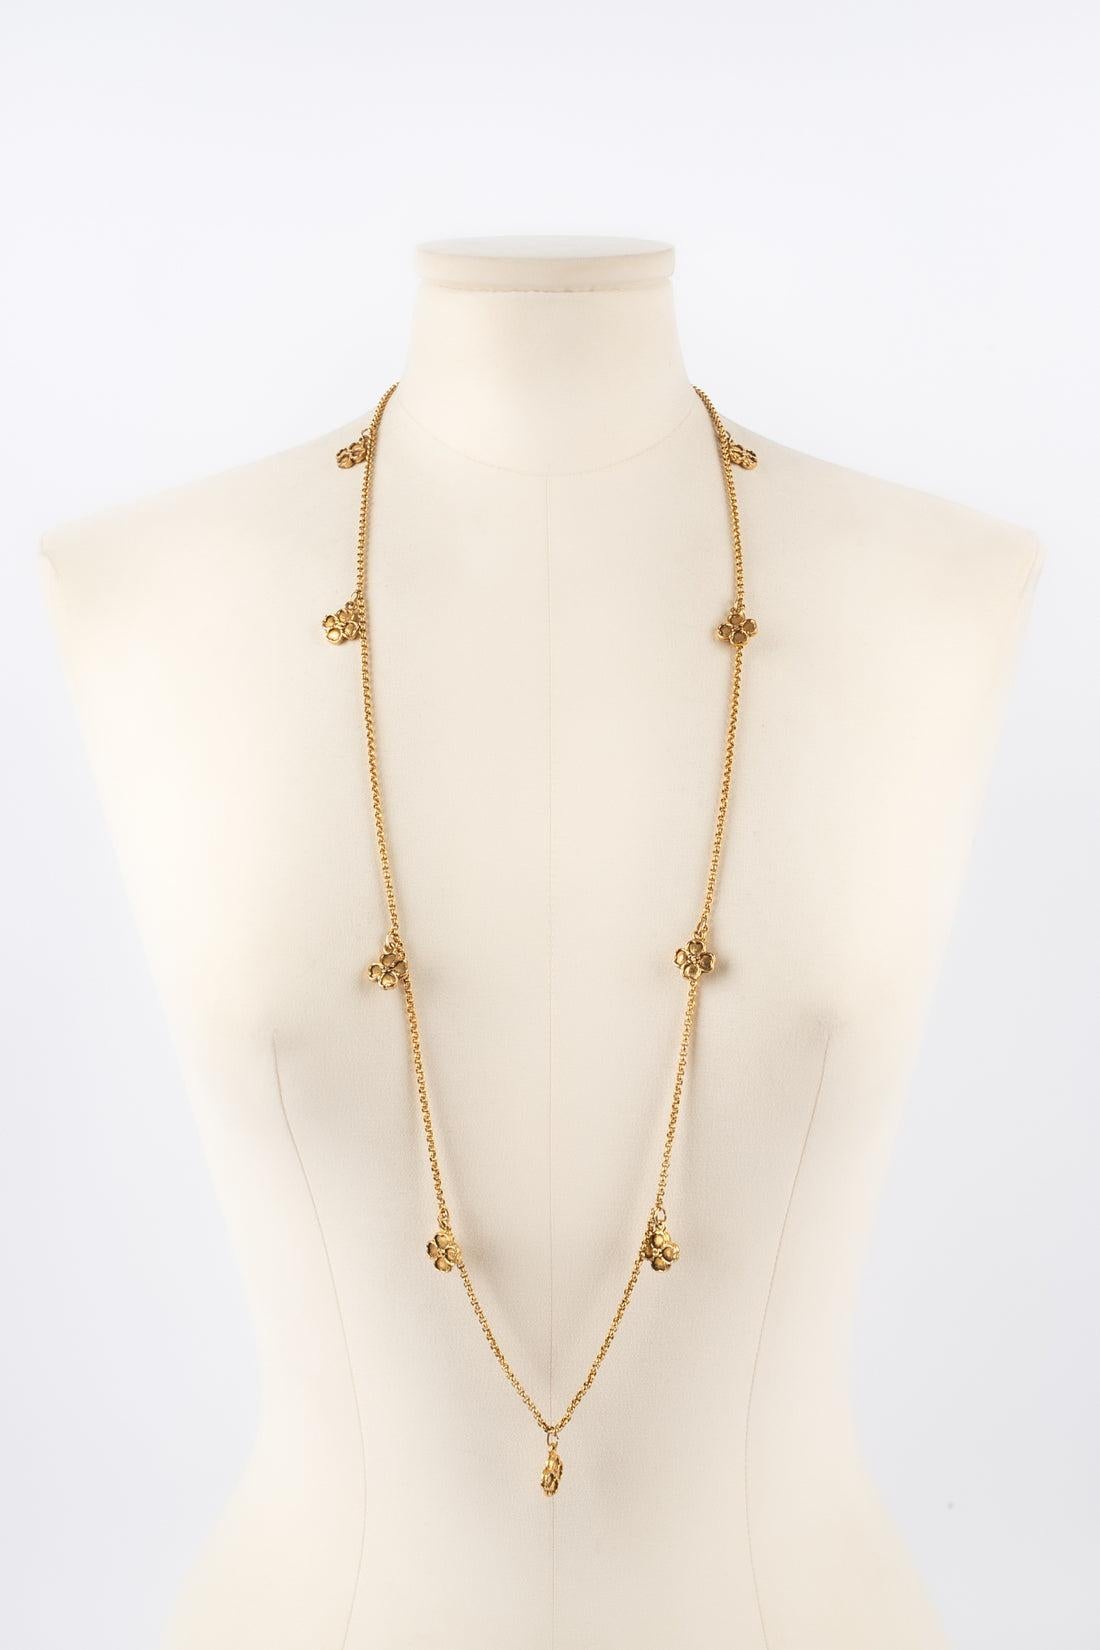 Chanel - (Made in France) Golden metal long necklace with medallions representing four-leaved clovers centered with cc logos. 1984 Collection.

Additional information:
Condition: Very good condition
Dimensions: Length: 95 cm
Period: 20th